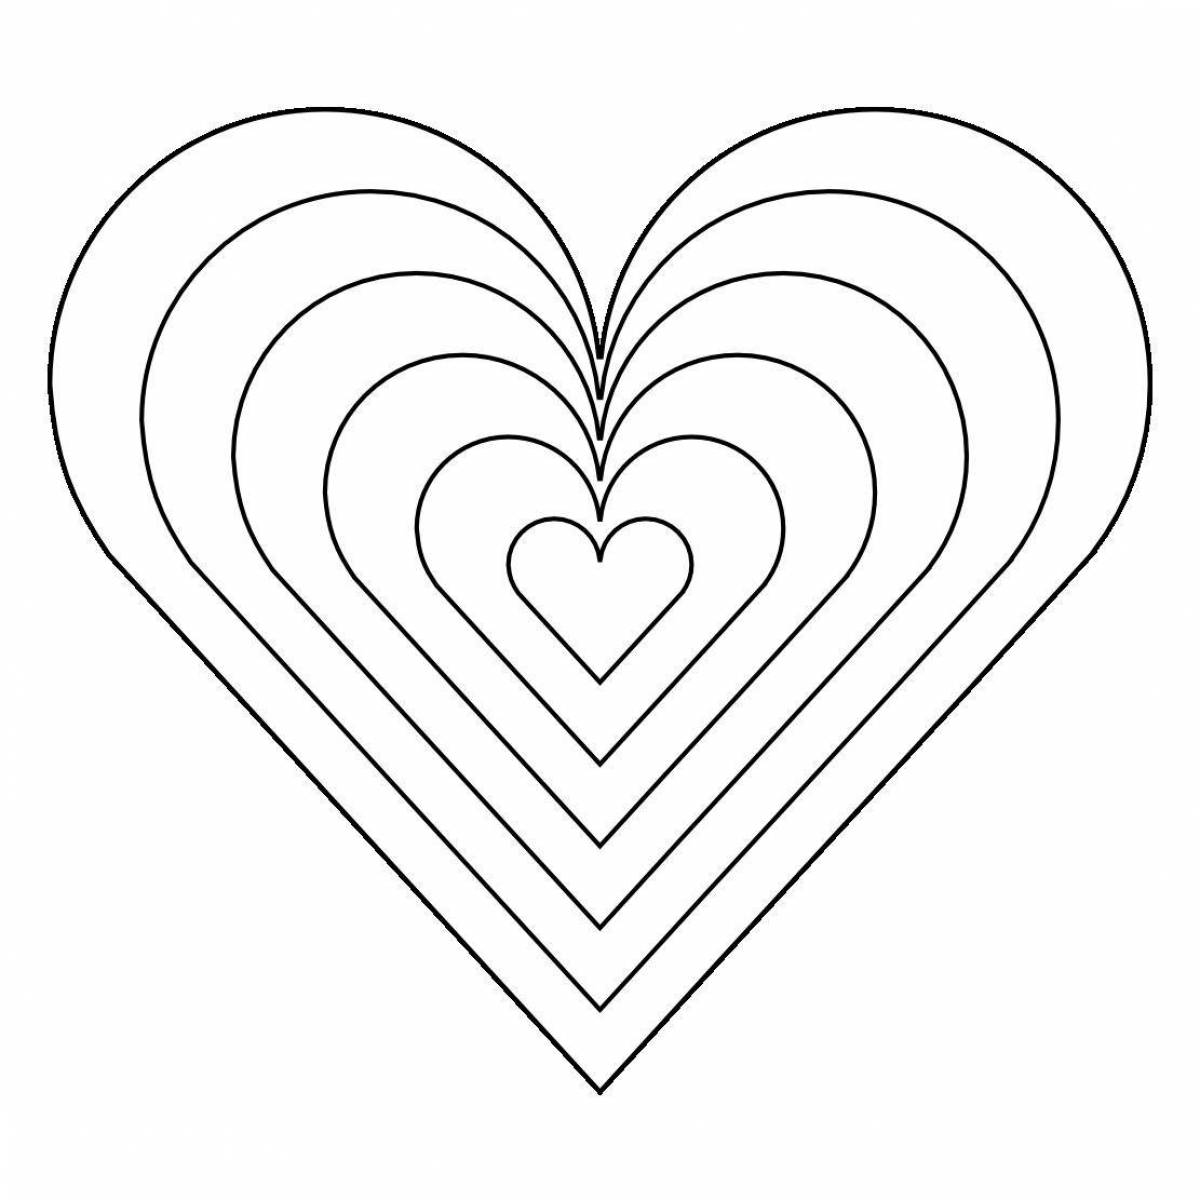 Adorable rainbow heart coloring page